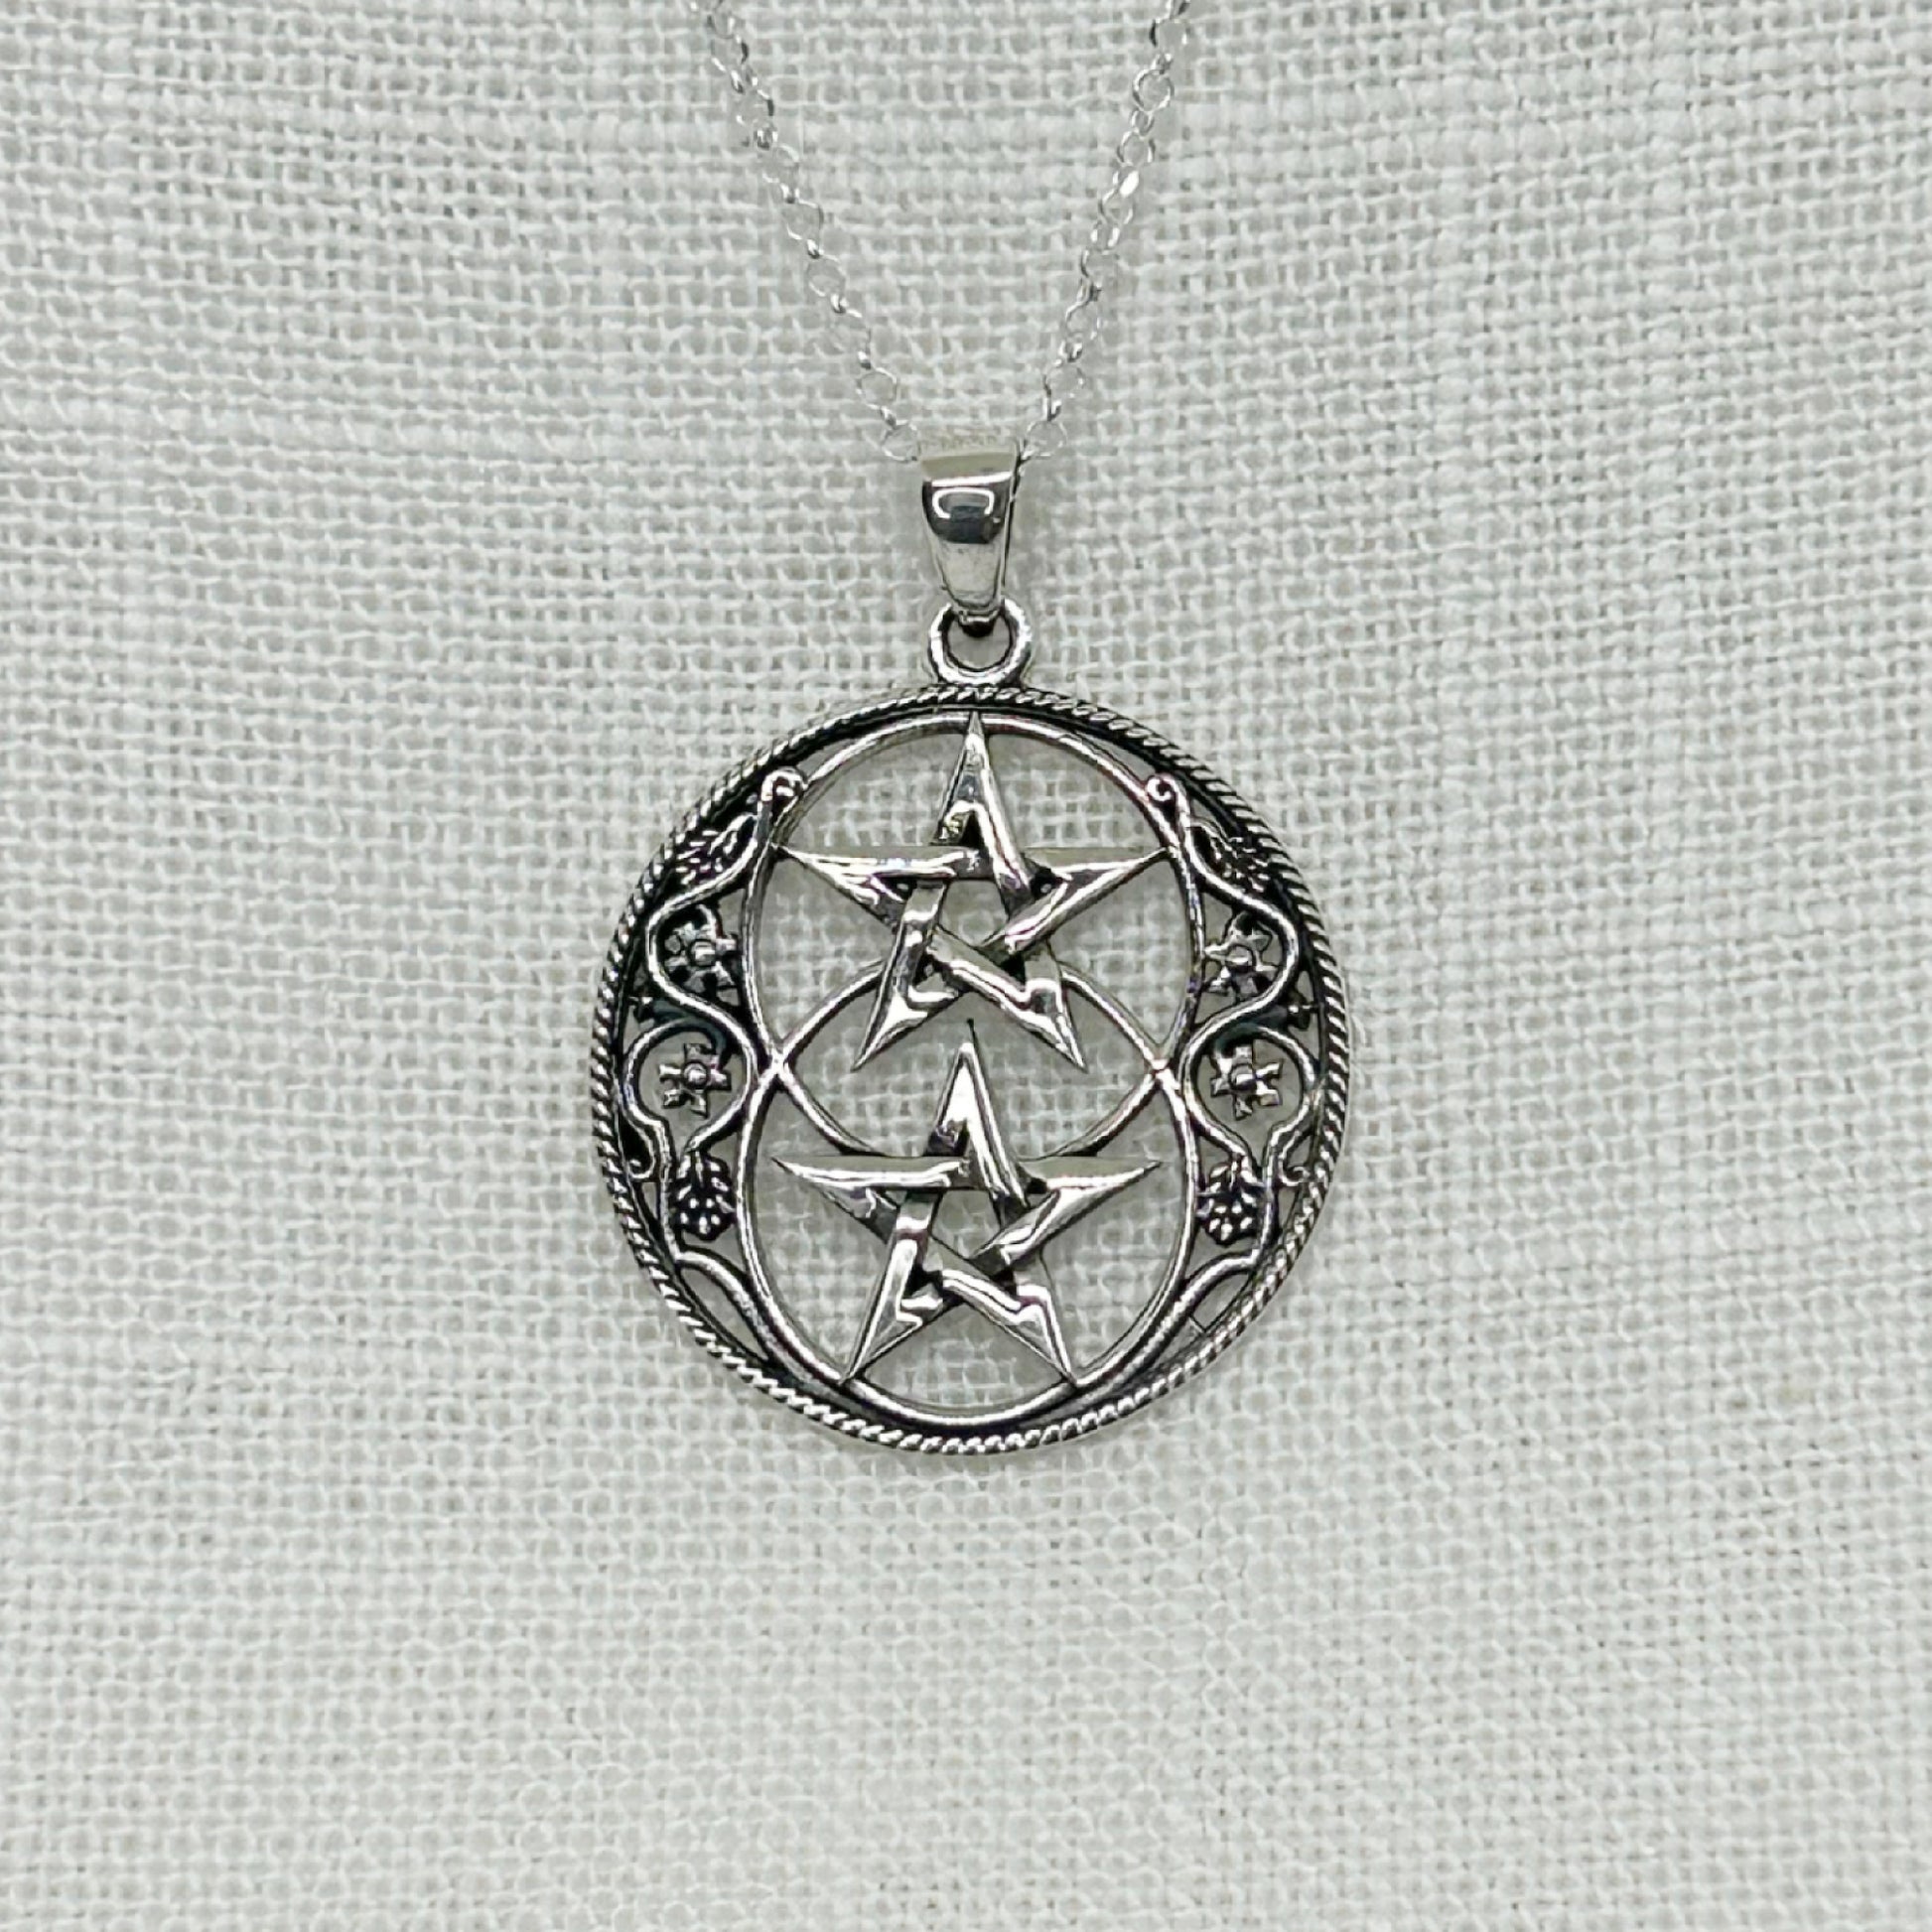 This beautiful Chalice Well themed Necklace is inspired by the well at the heart of Glastonbury and features two Pentagrams.  The size of the pendant is 3.1cm long (including the bale) by 2.4cm in diameter.  The pendant comes on a 20" sterling silver chain and arrives in a tarnish proof bag inside a gift box.